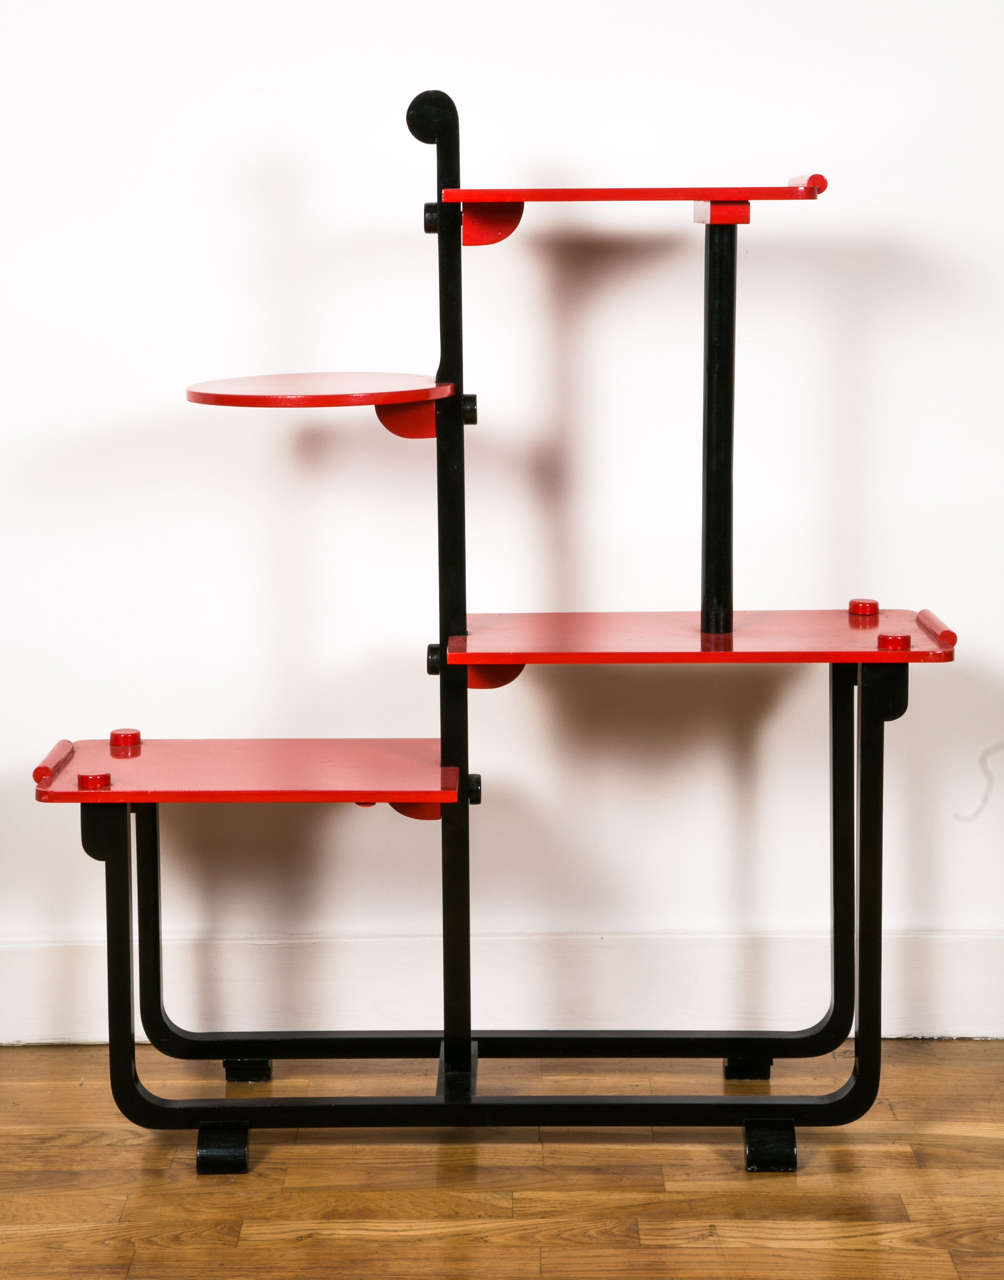 Very elegant modernist style Art Deco shelves by André Groult (1884-1966). Wooden structure topped with four shelves assembled by large visible wood screws (see photo). Black lacquered structure and red lacquered shelves.